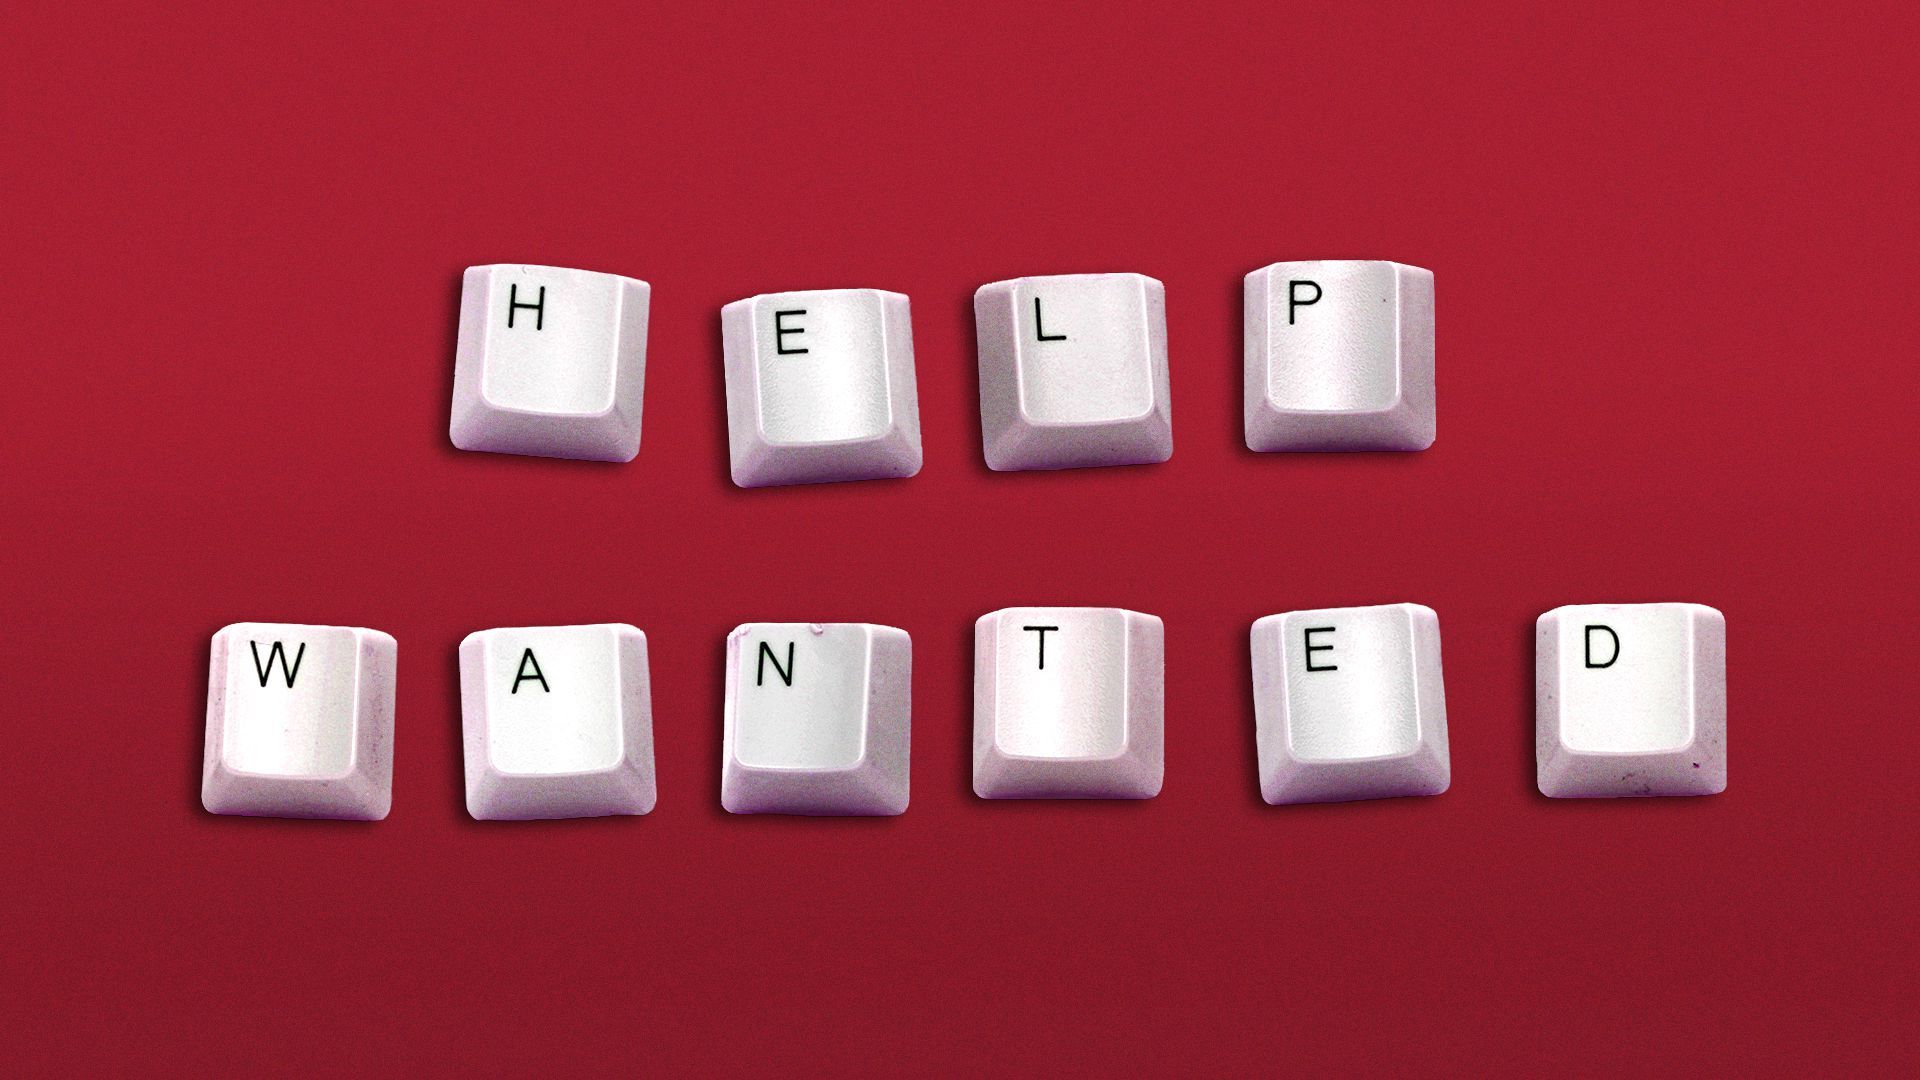 Illustration of keyboard letters spelling "Help Wanted"